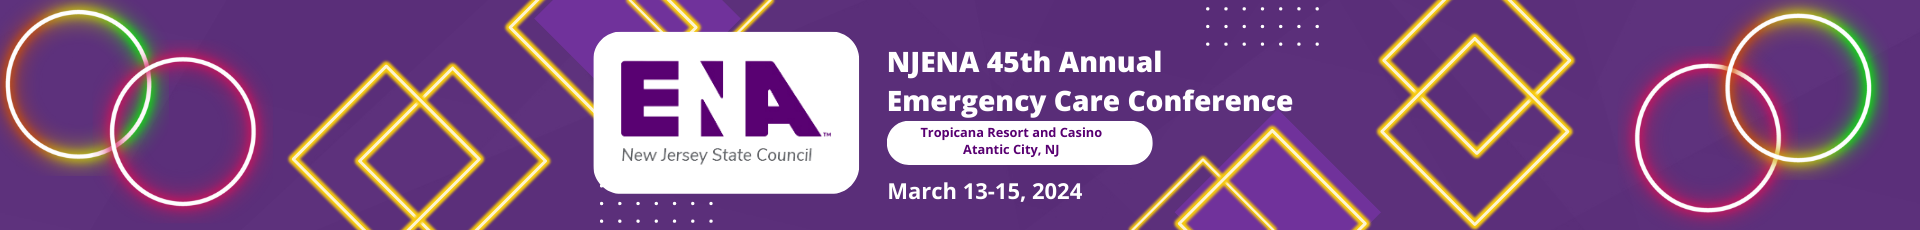 2024 NJENA Annual Emergency Care Conference Event Banner